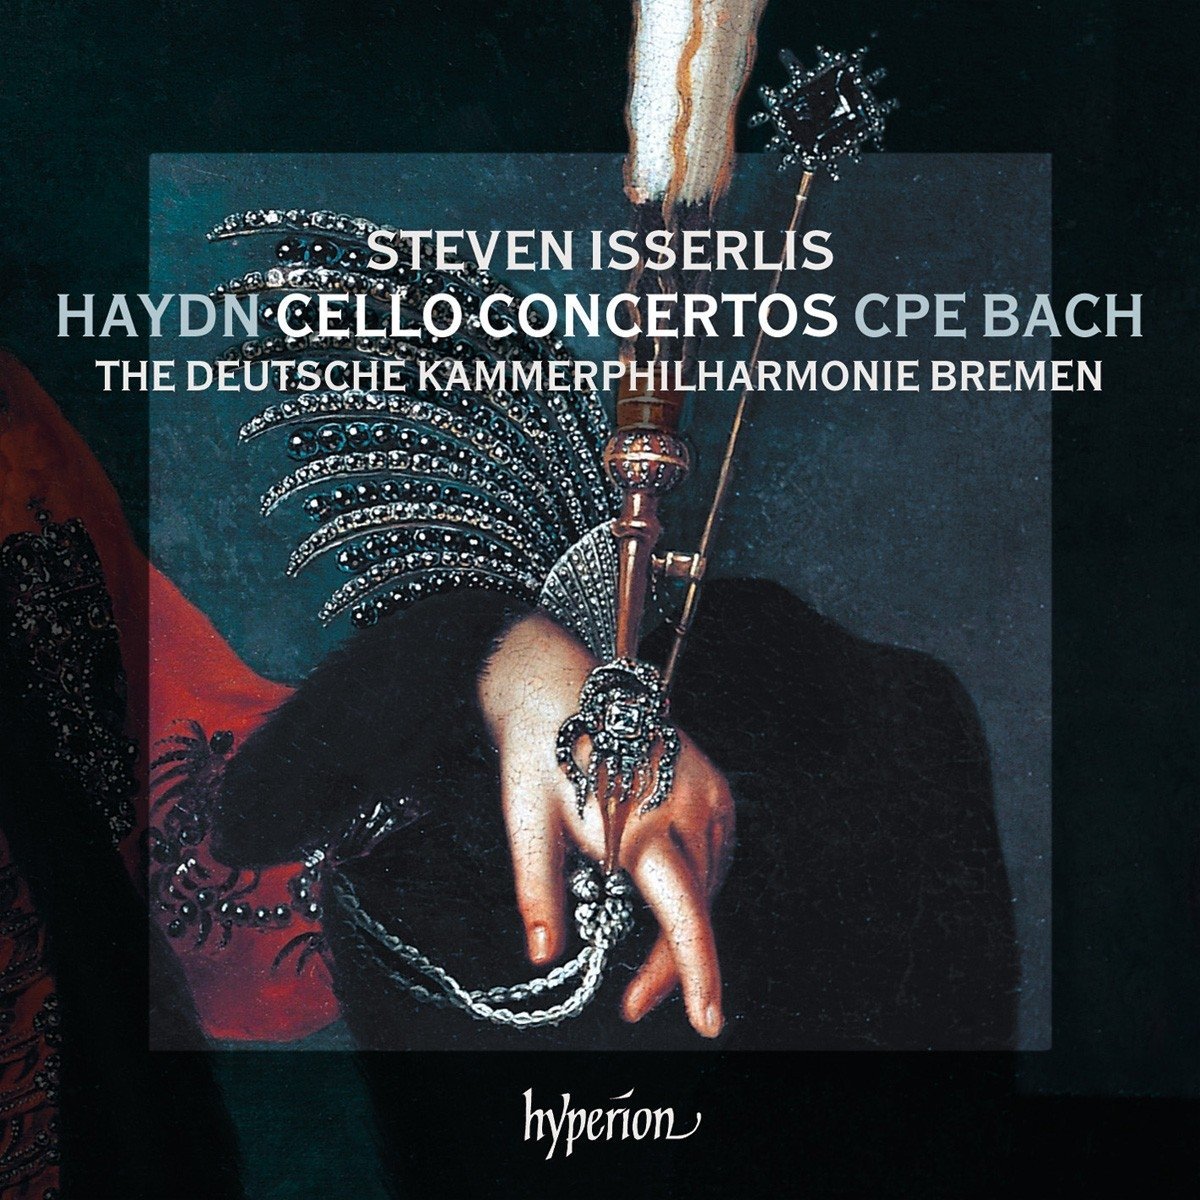 Haydn & CPE Bach: Cellos Concertos - Steven Isserl